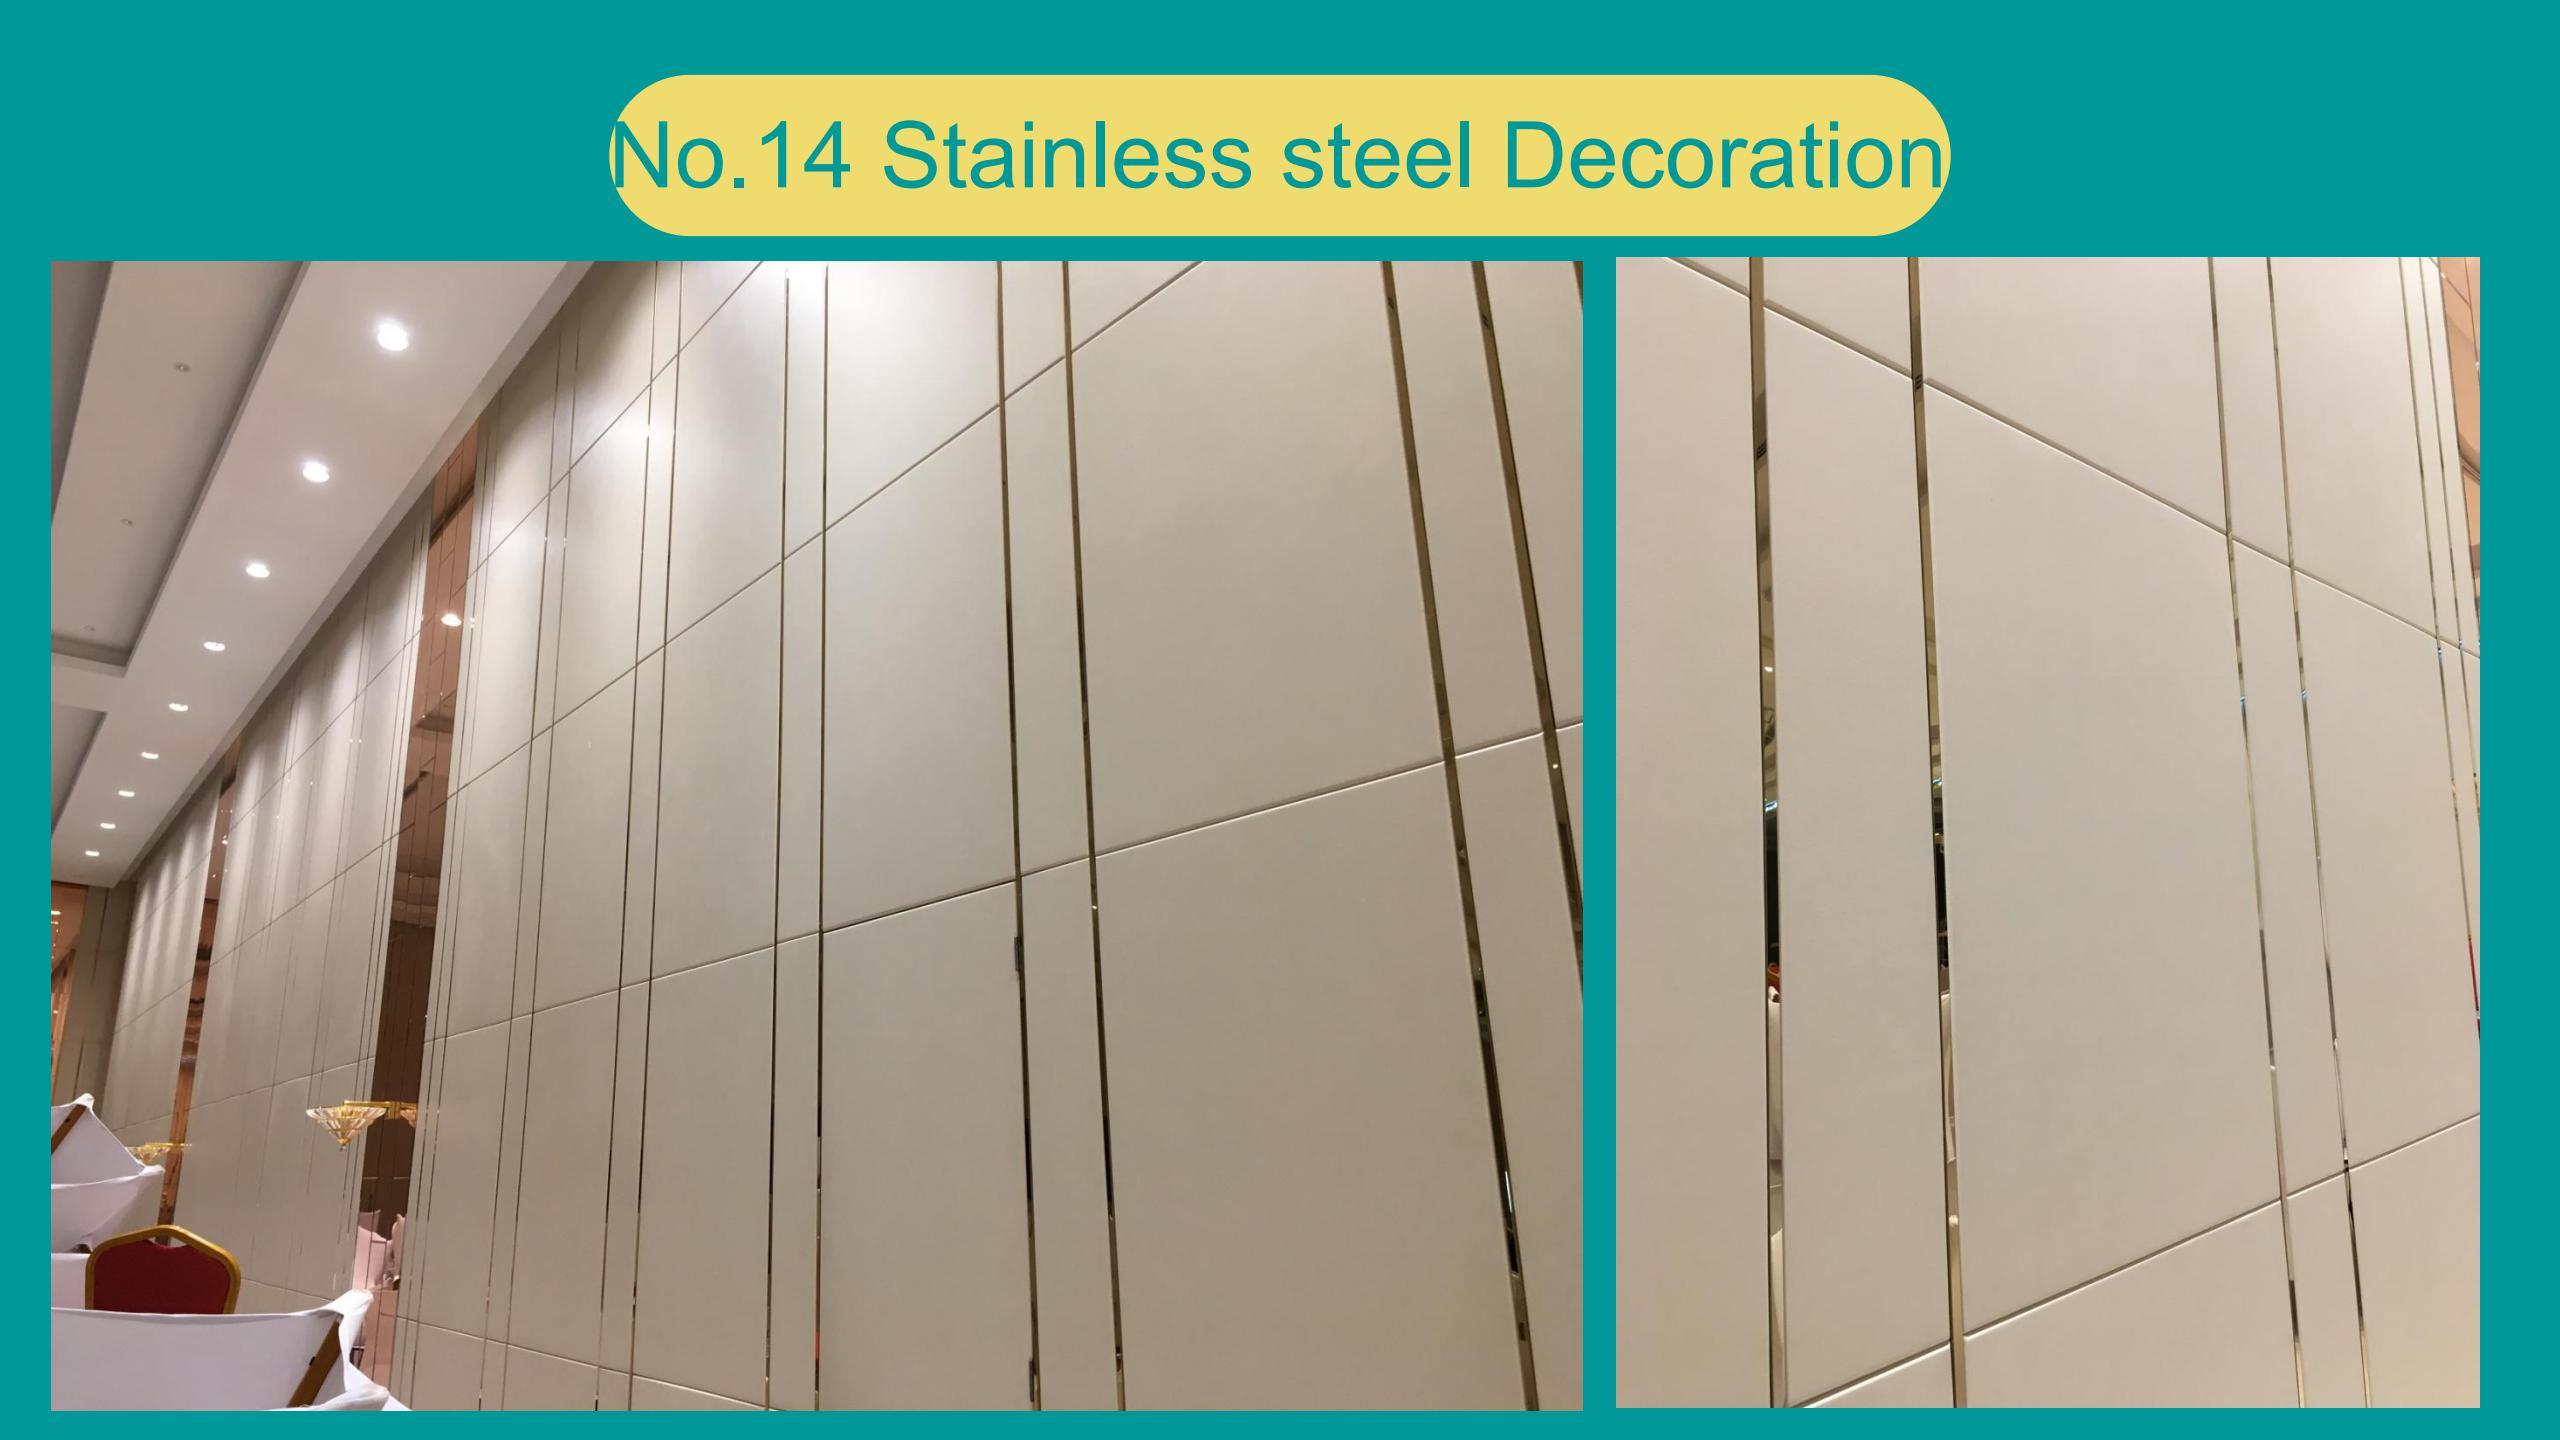 Stainless steel Decoration